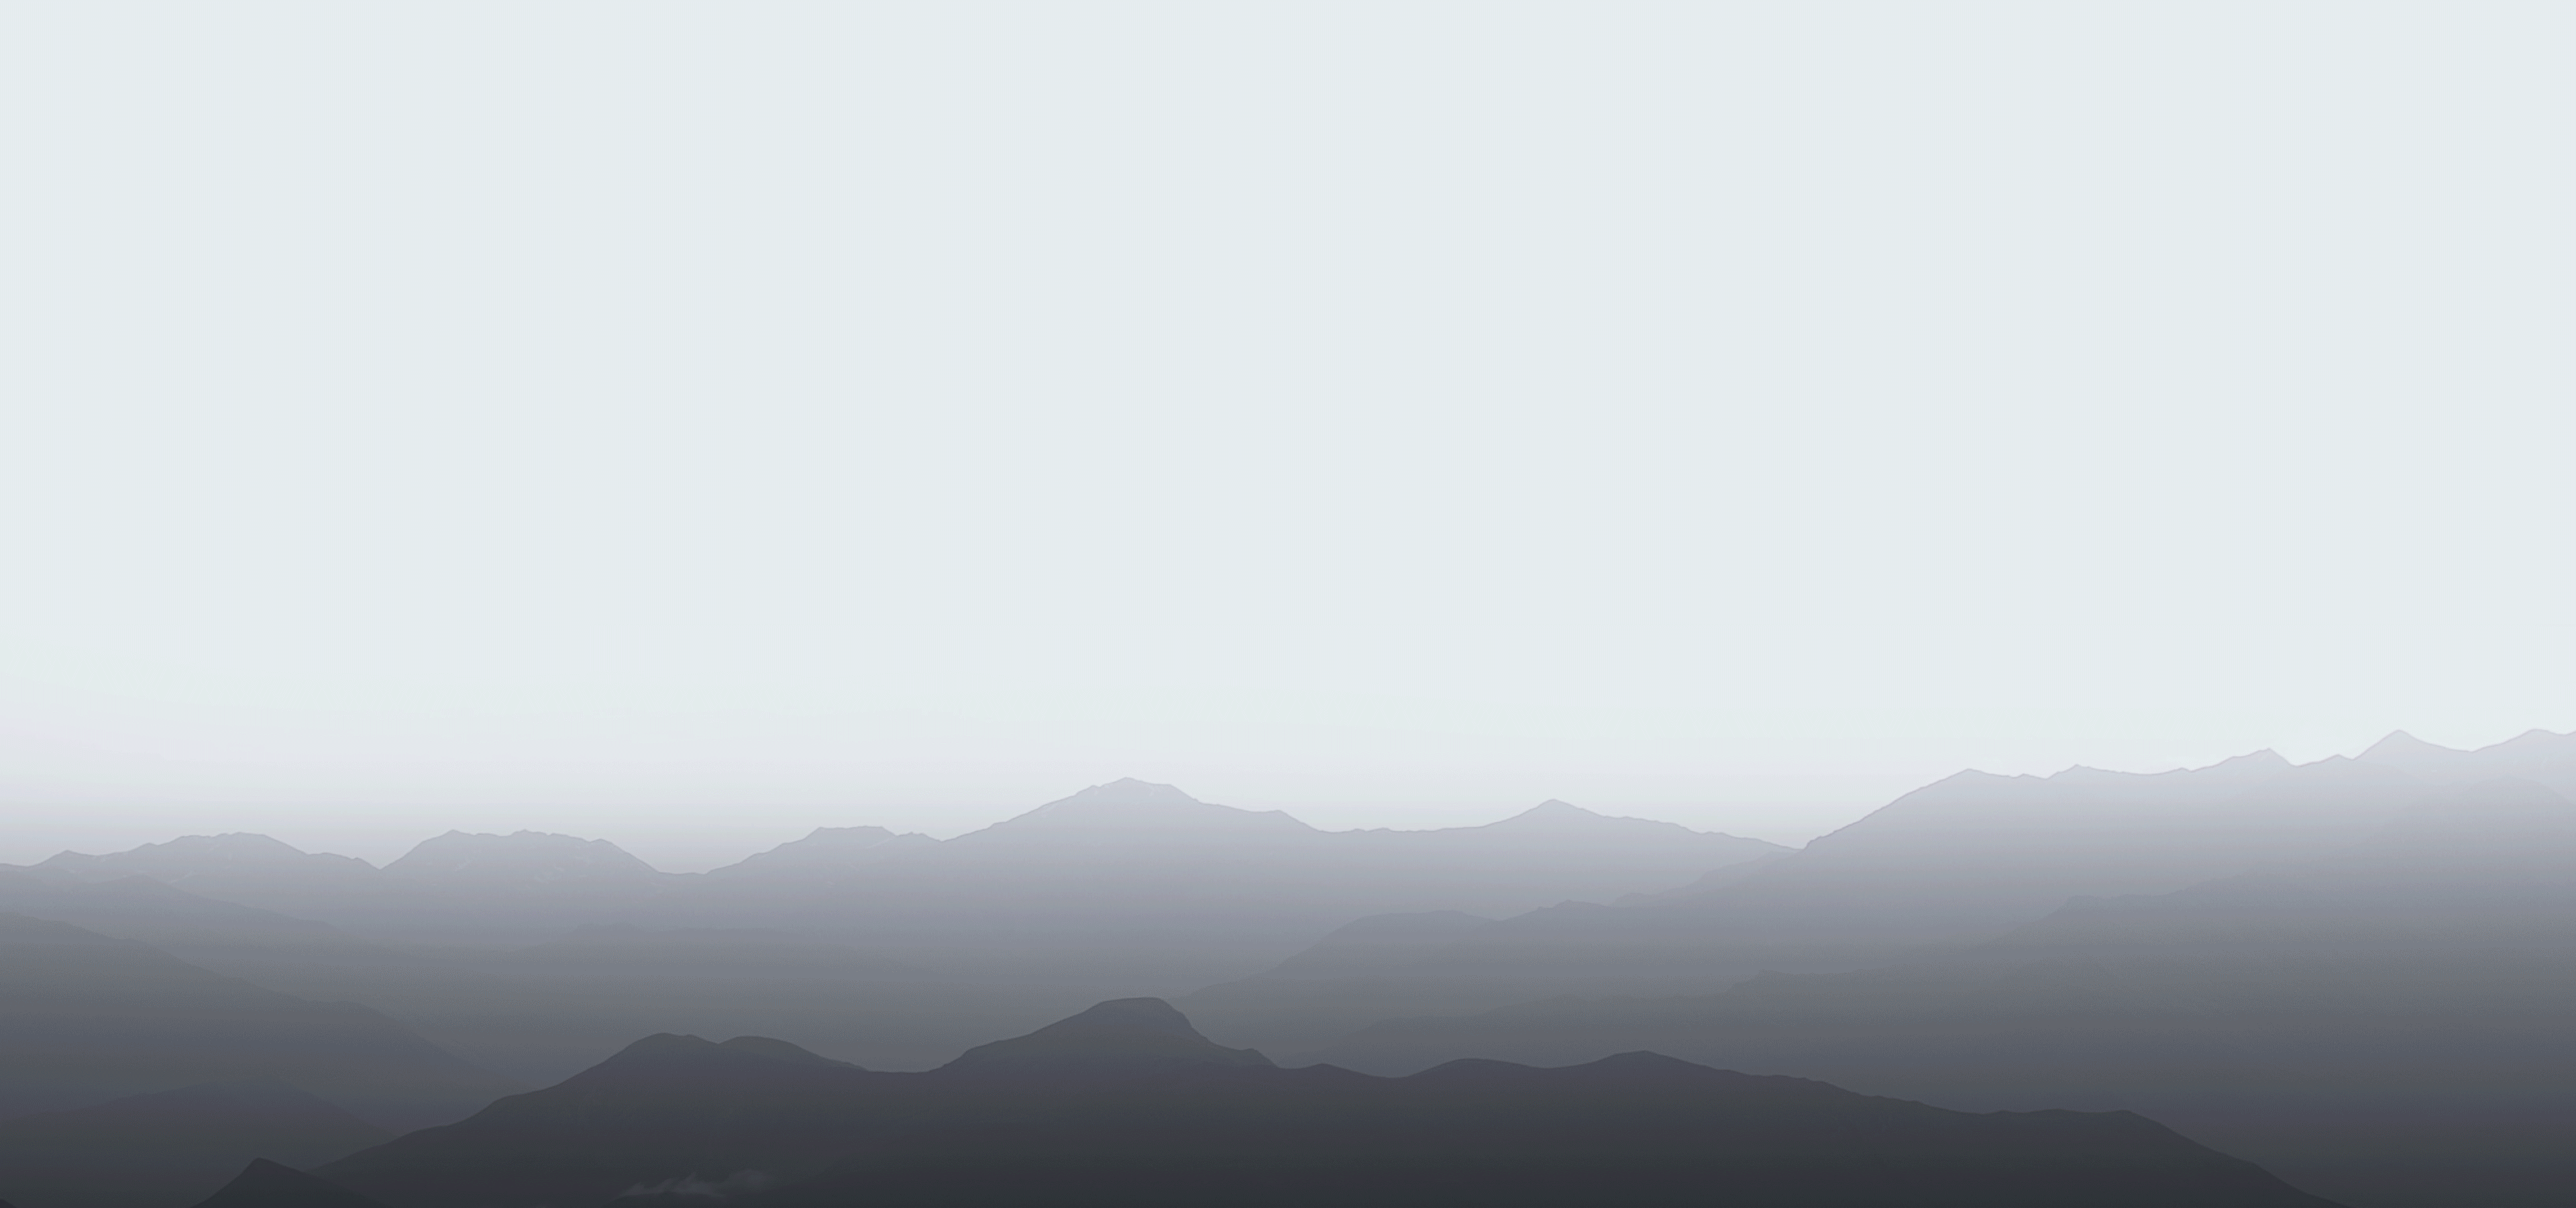 images of mountains lined up in rows